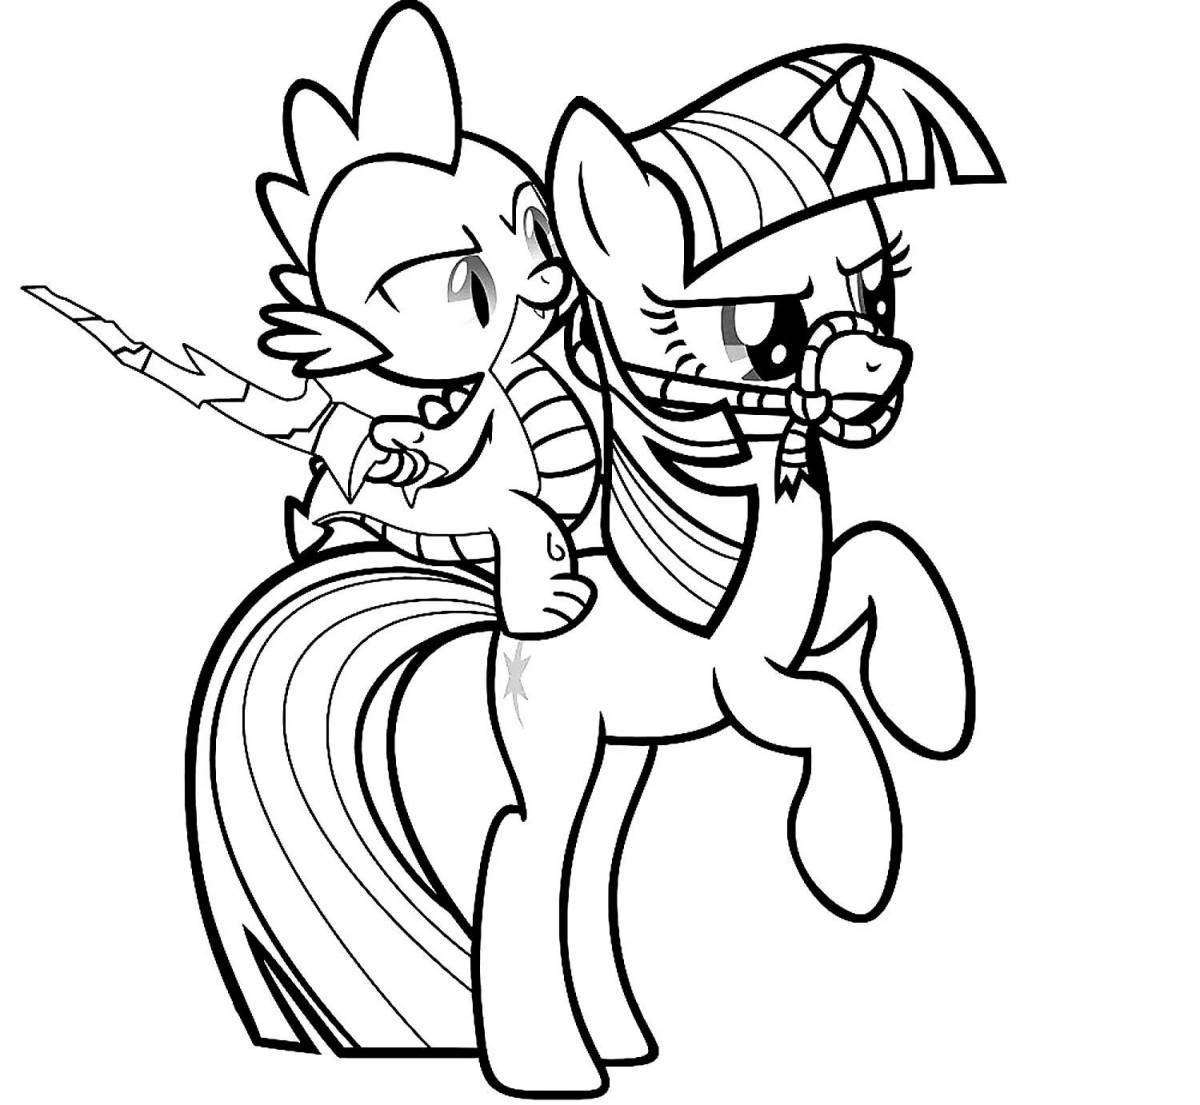 Adorable spike pony coloring book